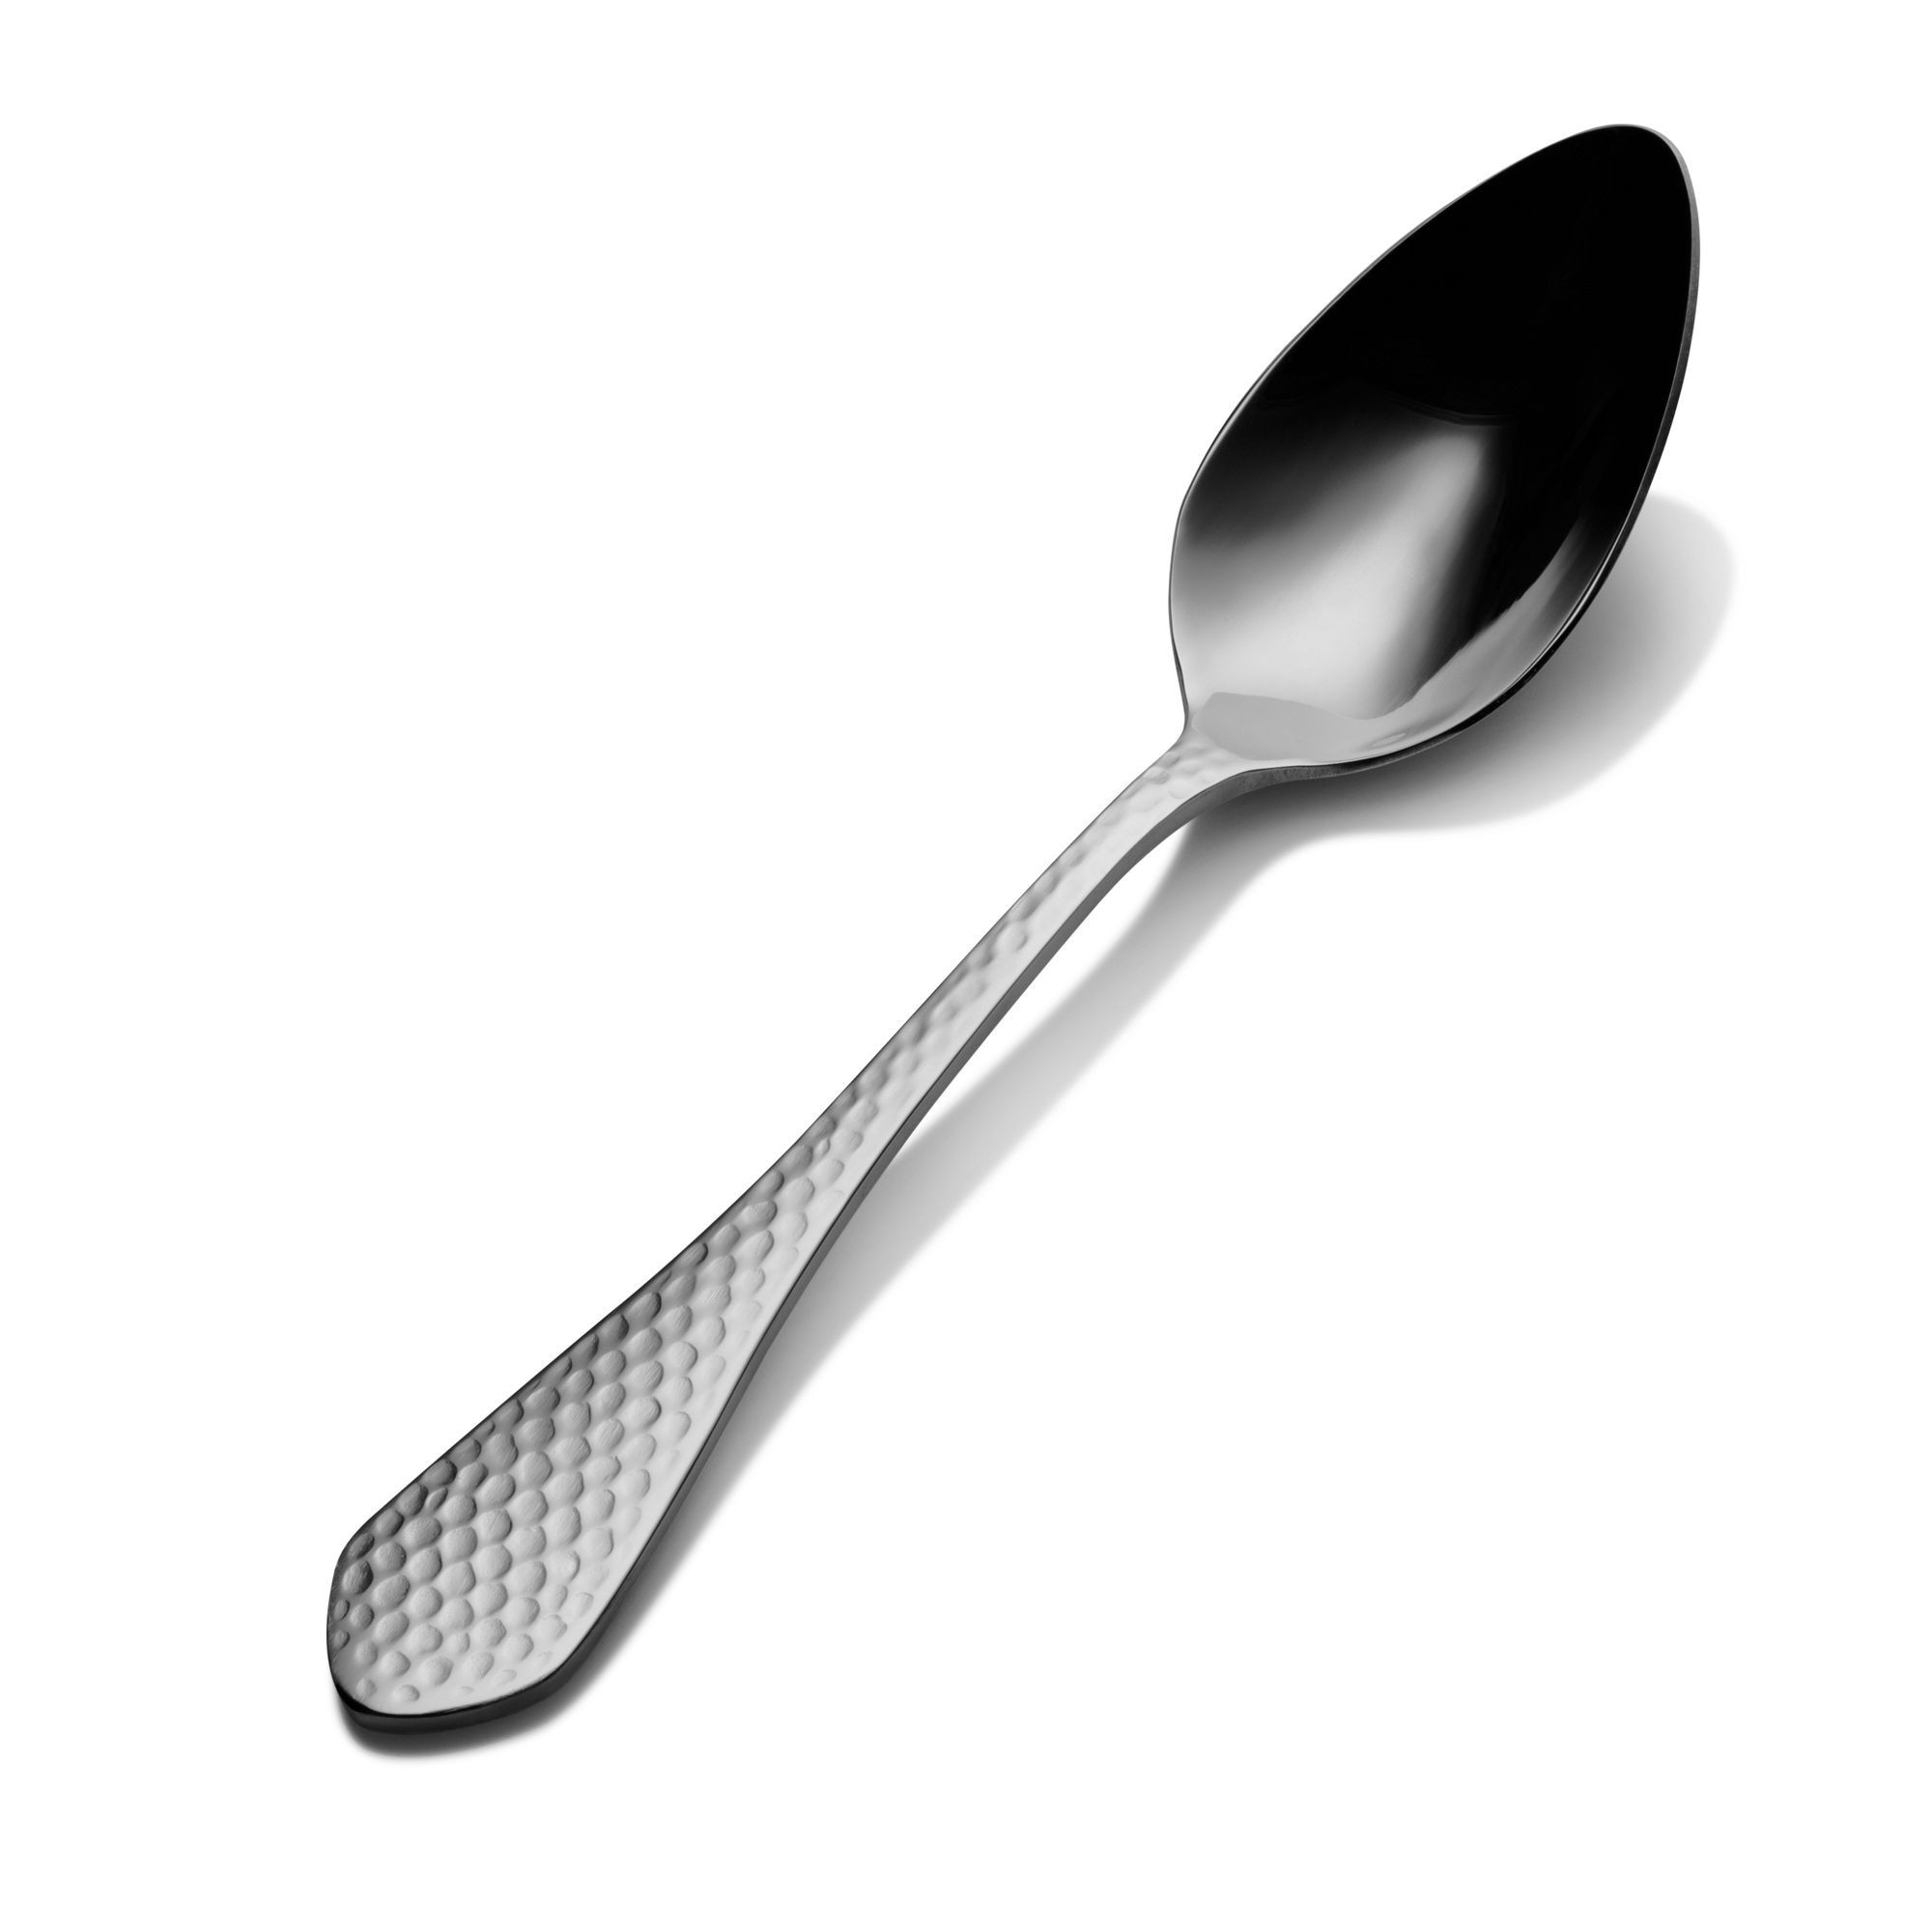 Bon Chef SBS1203S Reflections Bonsteel Silverplated Soup and Dessert Spoon